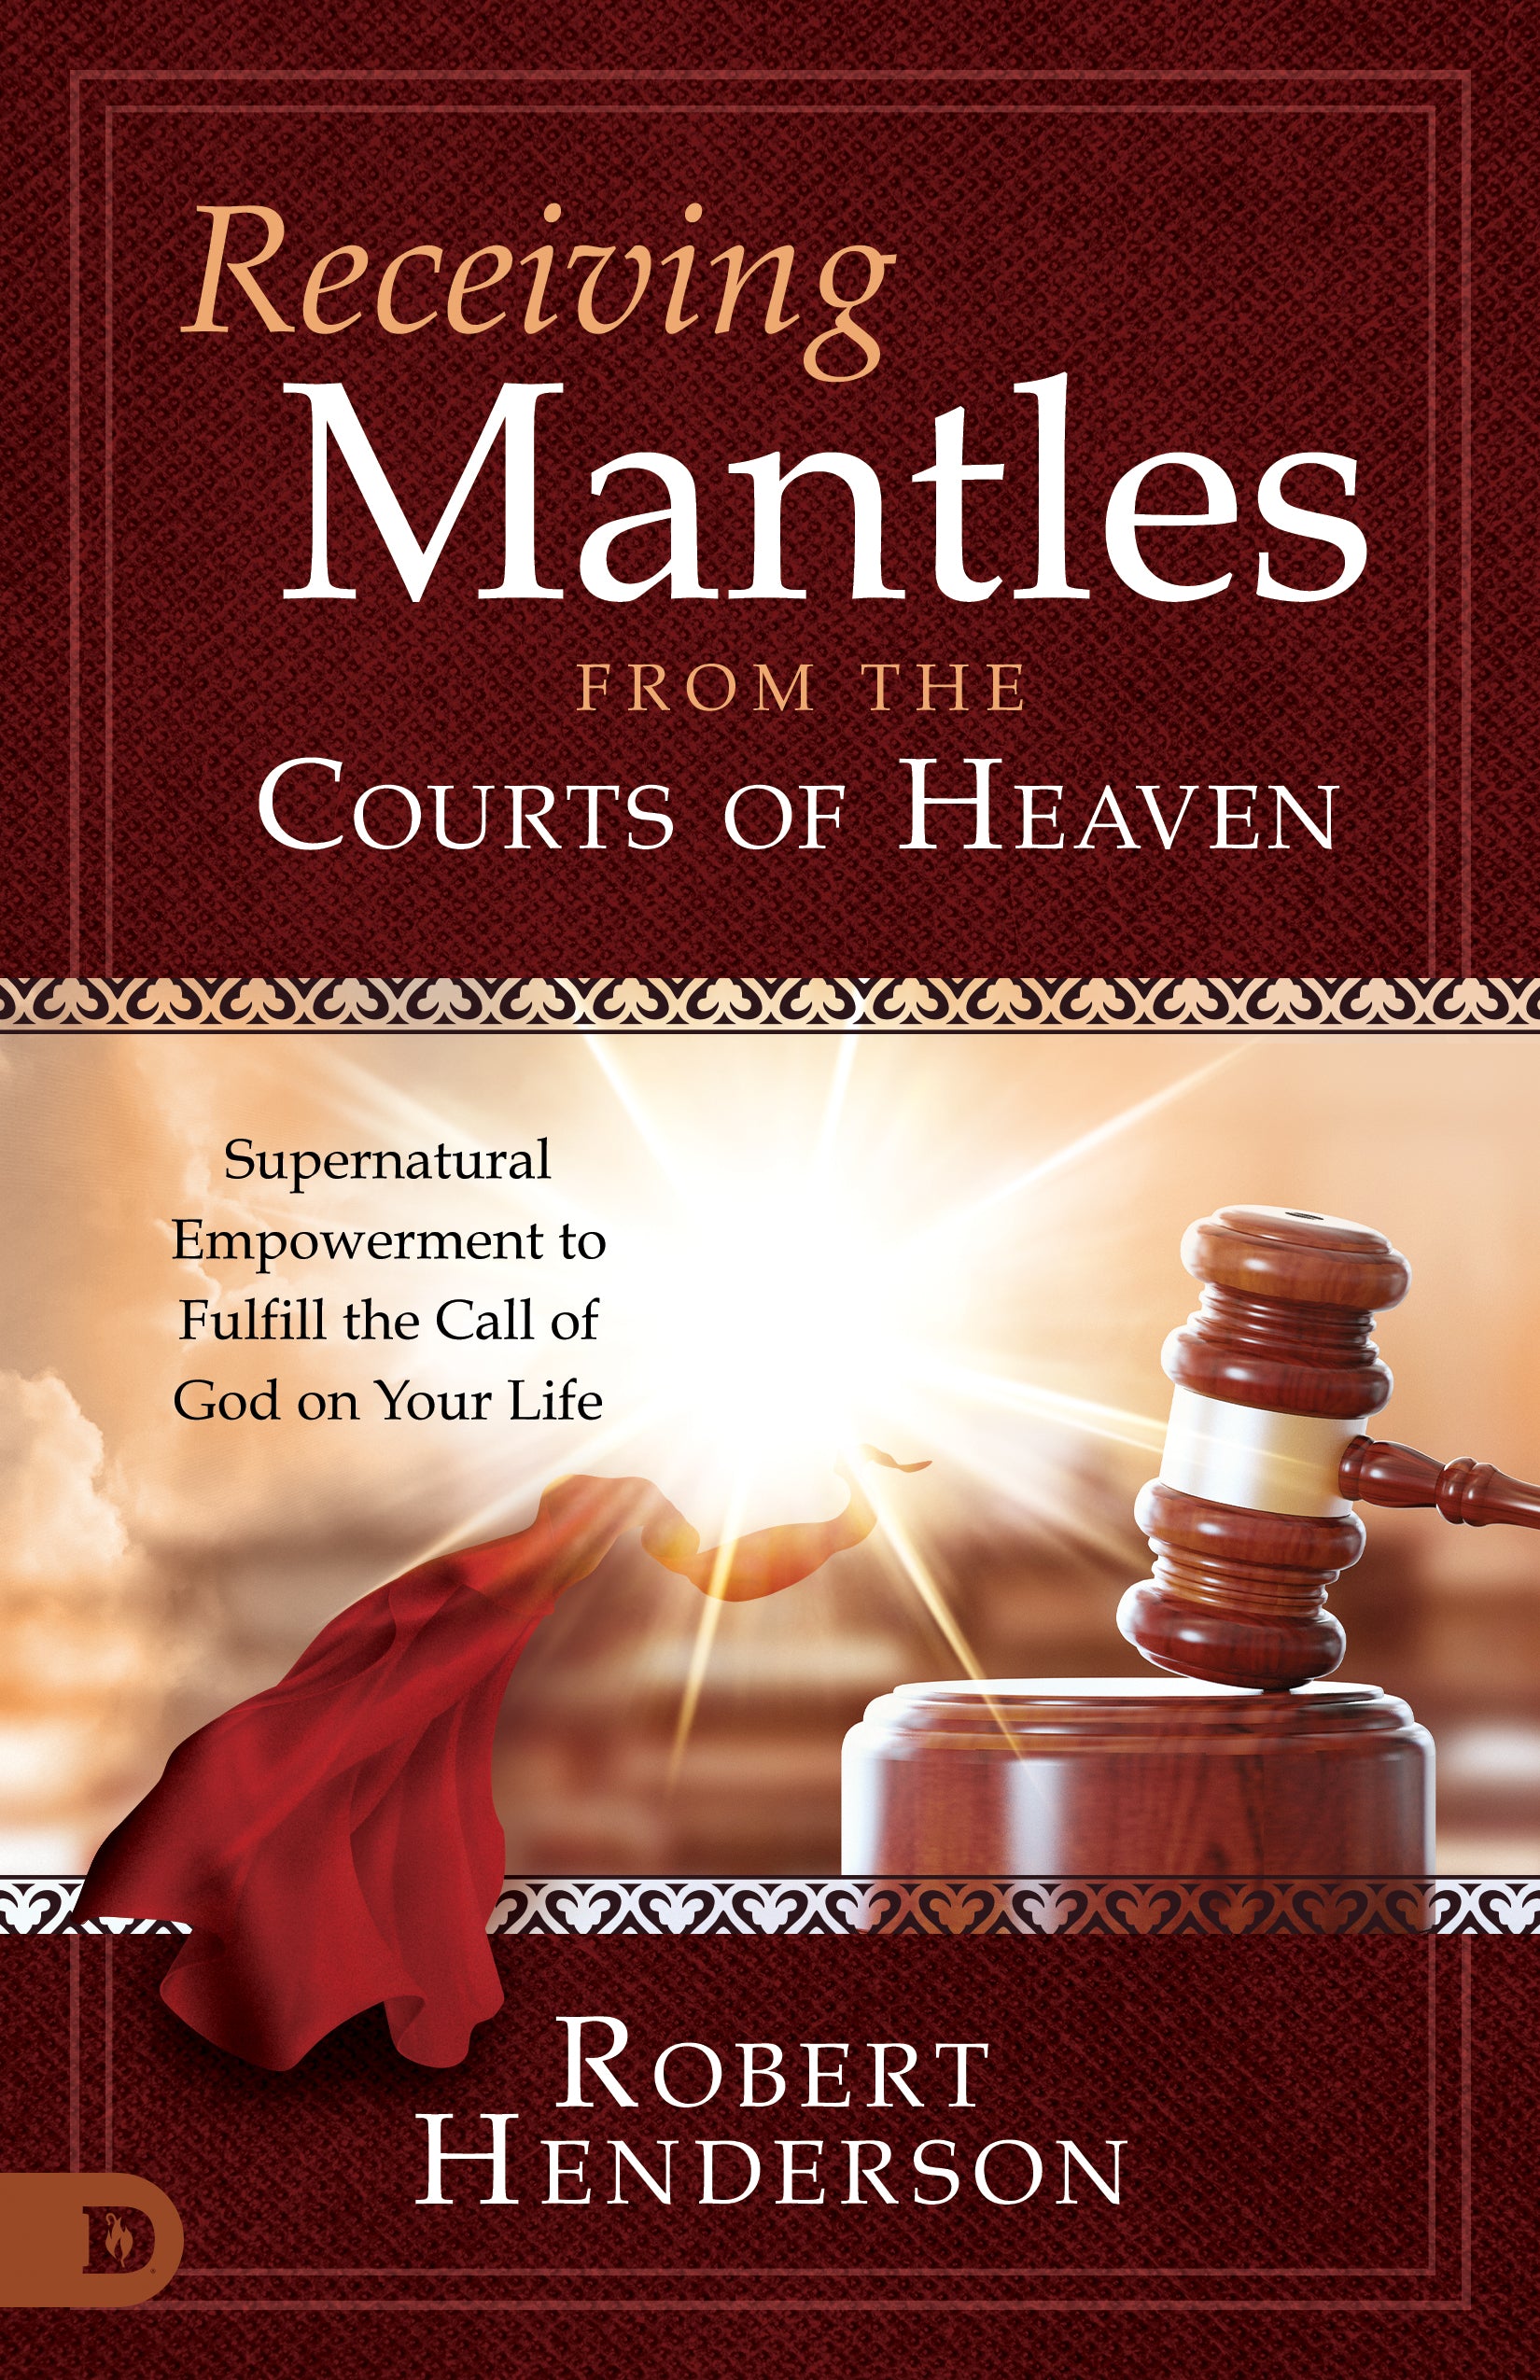 Receiving Mantles from the Courts of Heaven: Supernatural Empowerment to Fulfill the Call of God on Your Life Paperback – September 20, 2022